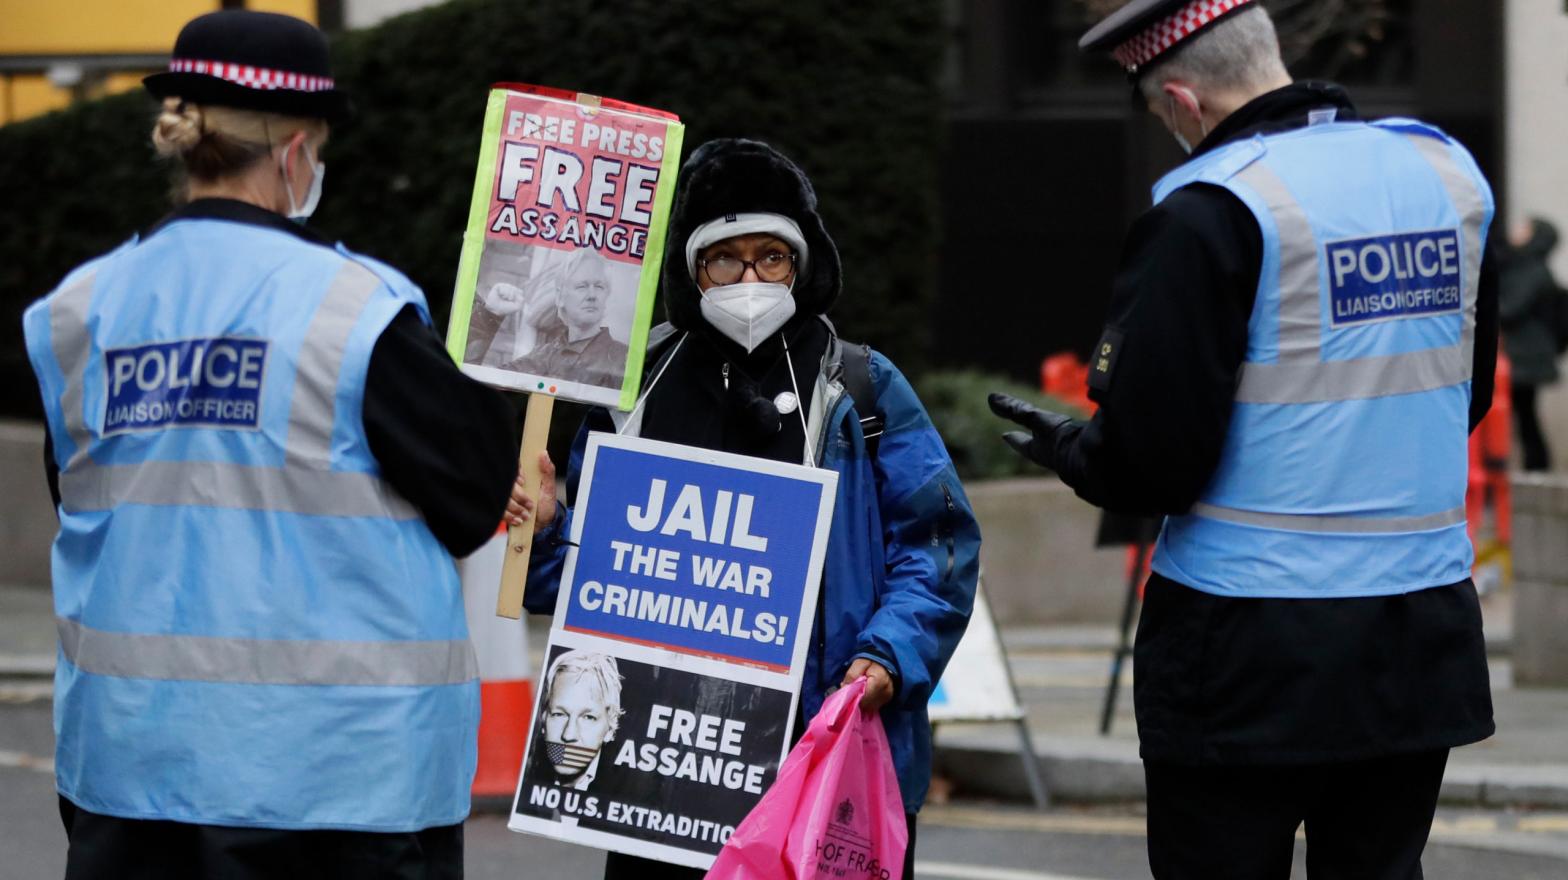 A Julian Assange supporter is spoken to by police officers outside the Old Bailey in London, Monday, Jan. 4, 2021. (Photo: Kirsty Wigglesworth, AP)